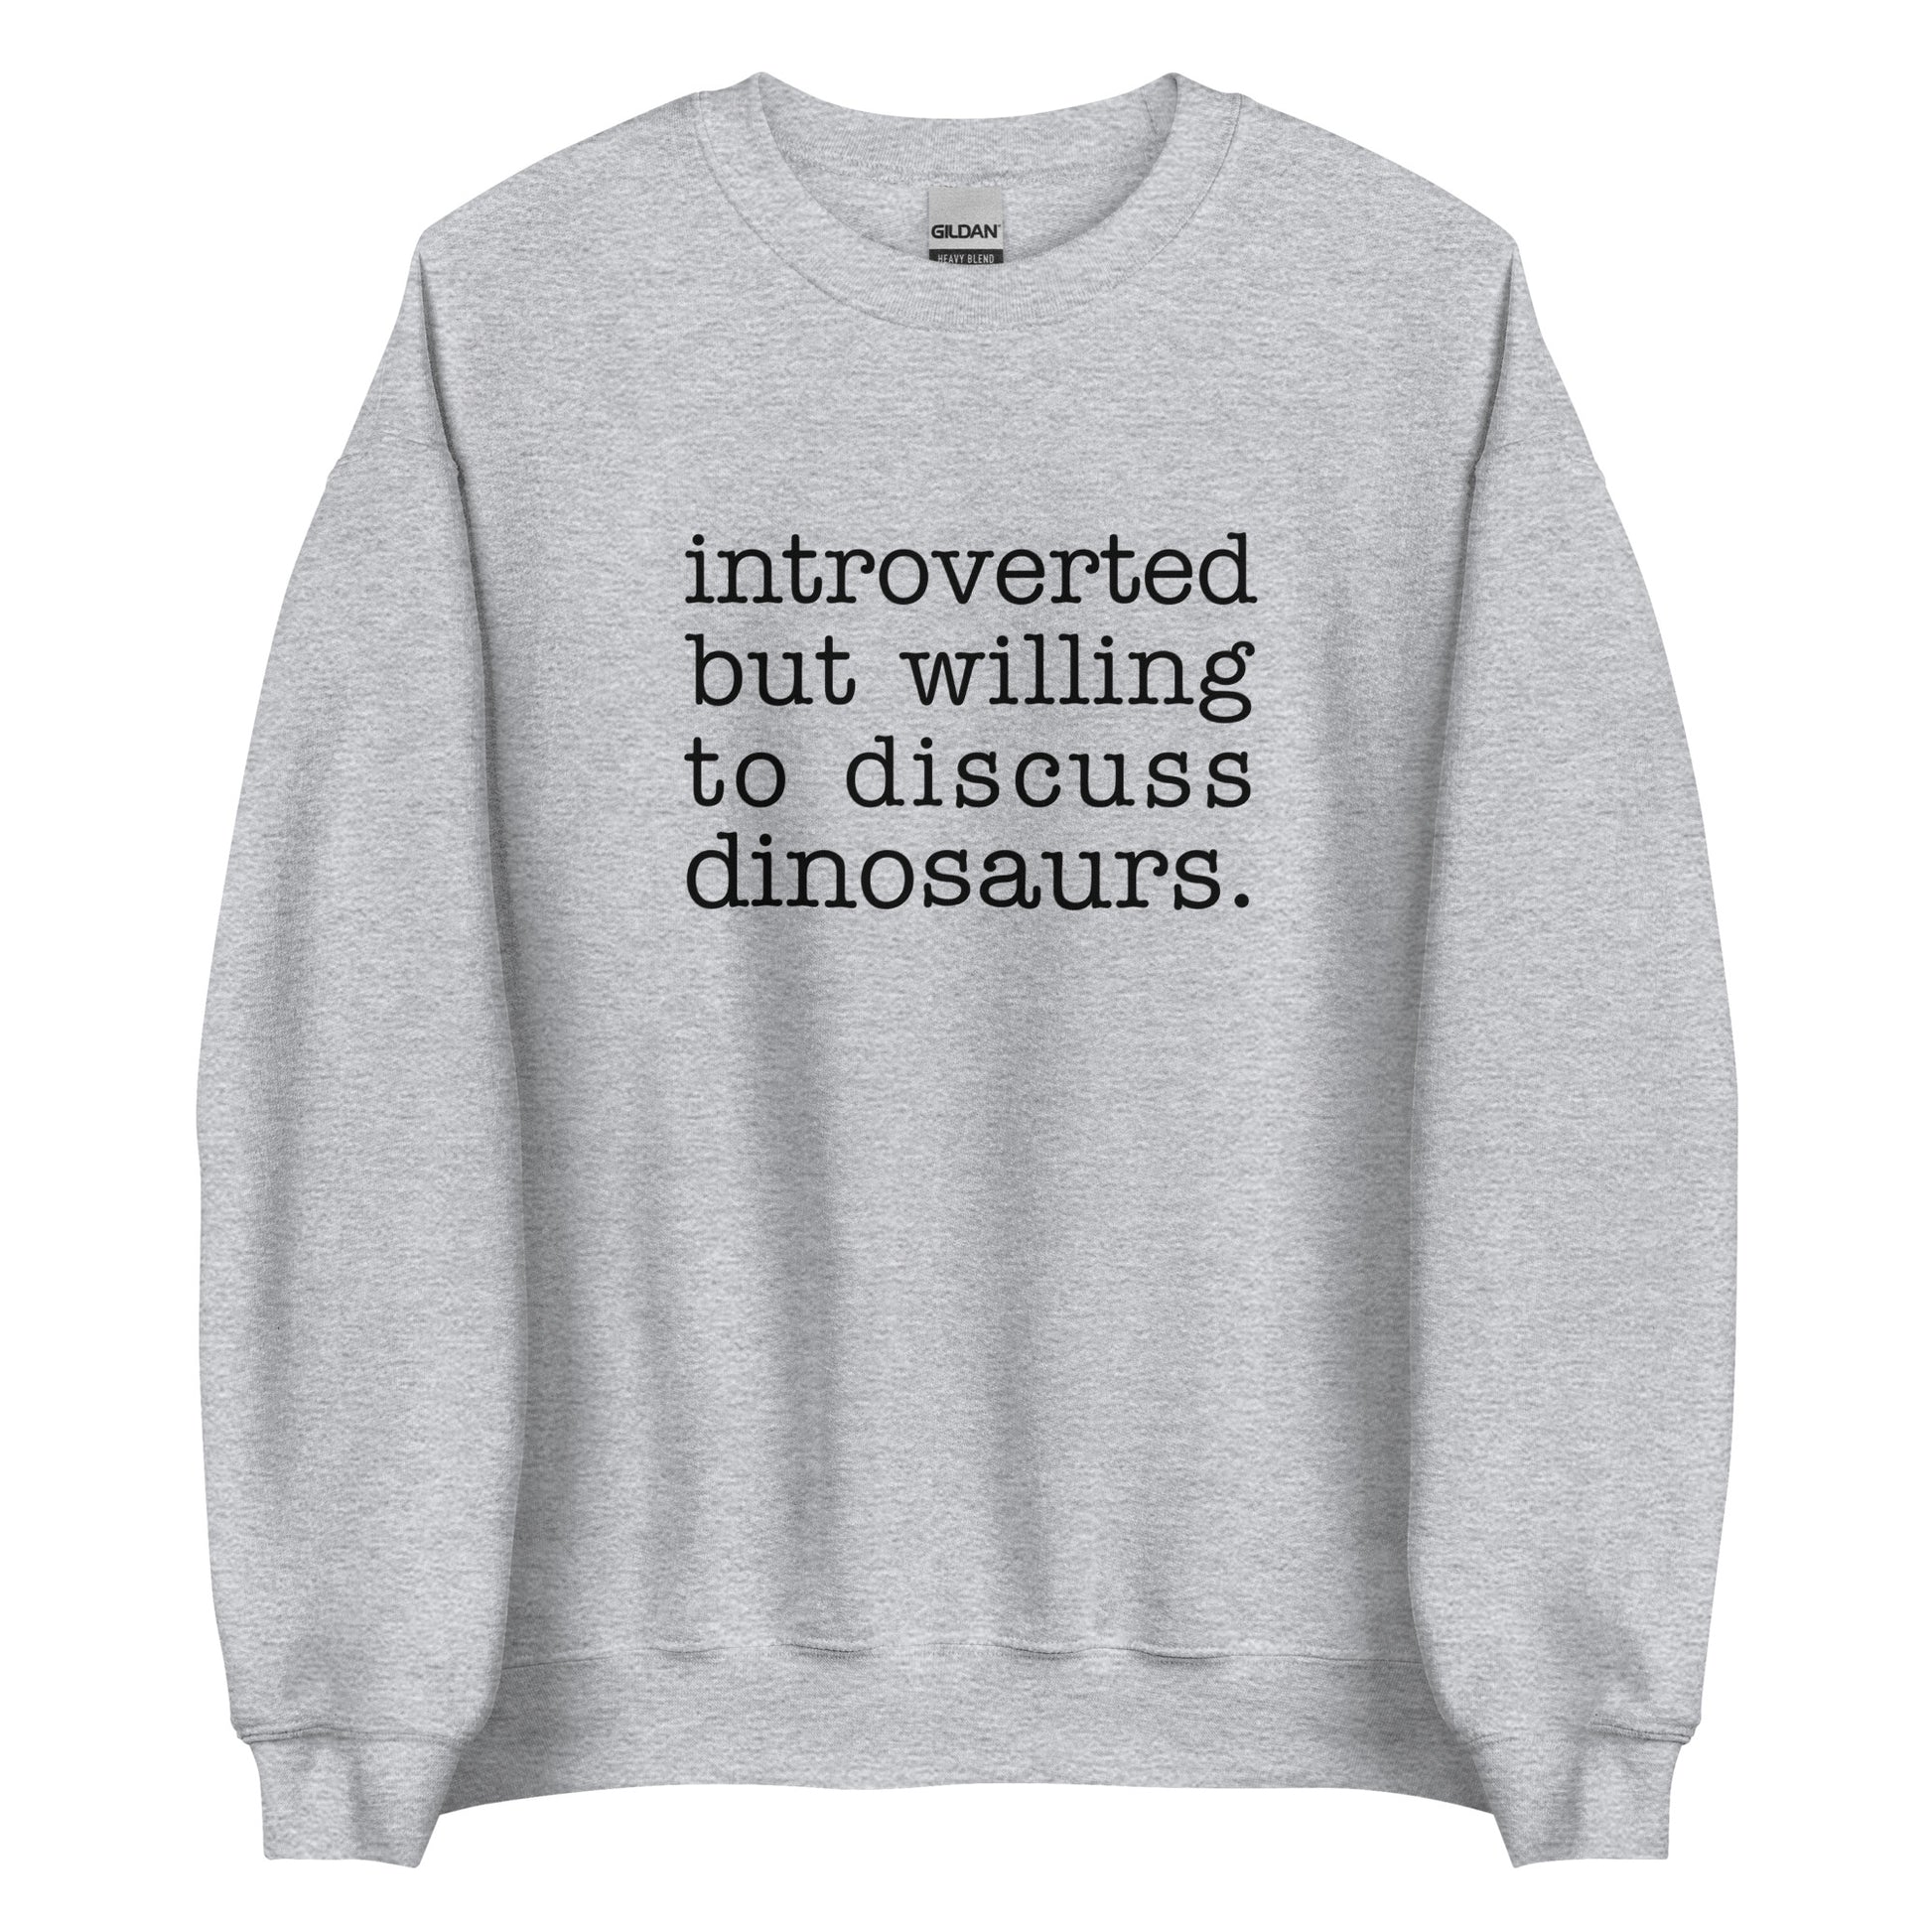 A heathered grey crewneck sweatshirt with black text reading "introverted but willing to discuss dinosaurs"